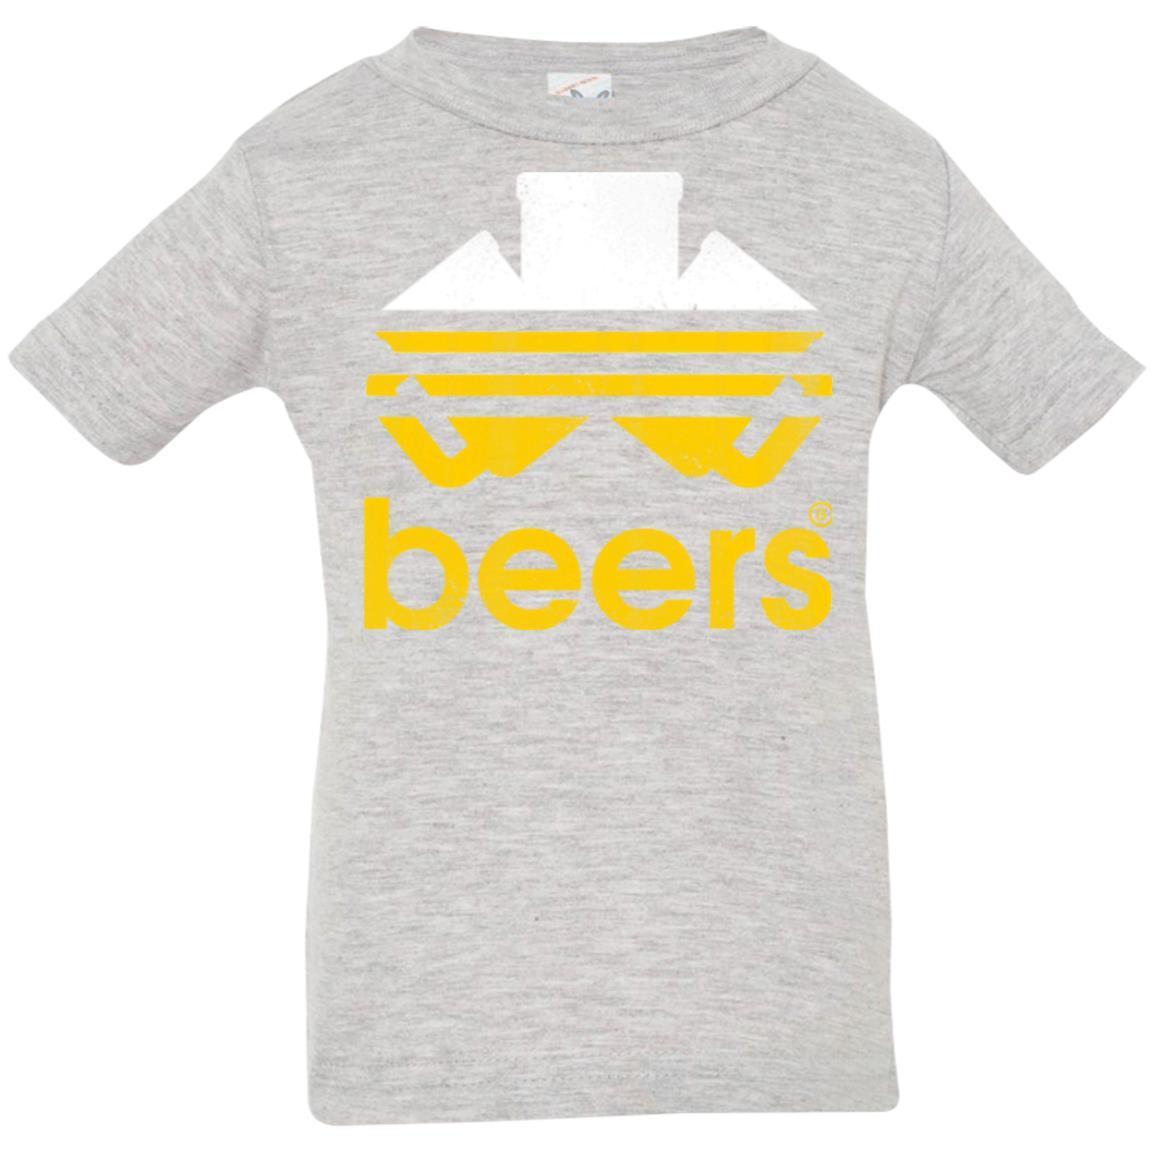 T-Shirts Heather / 6 Months Beers Infant Premium T-Shirt